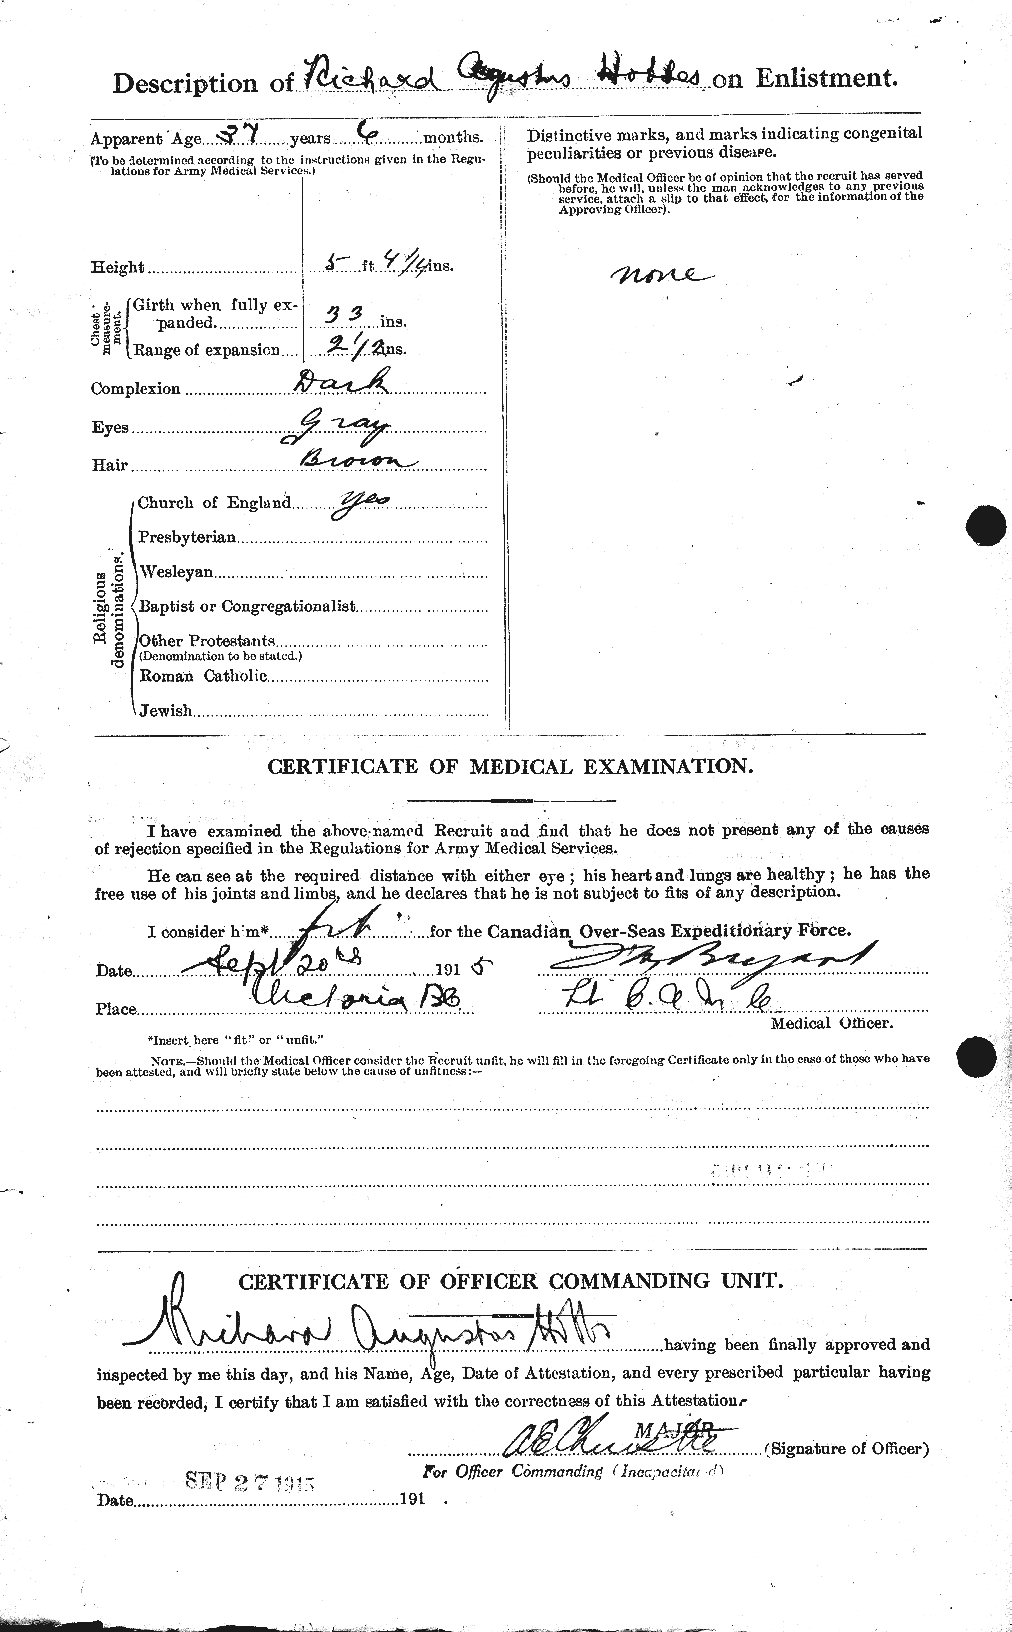 Personnel Records of the First World War - CEF 394996b